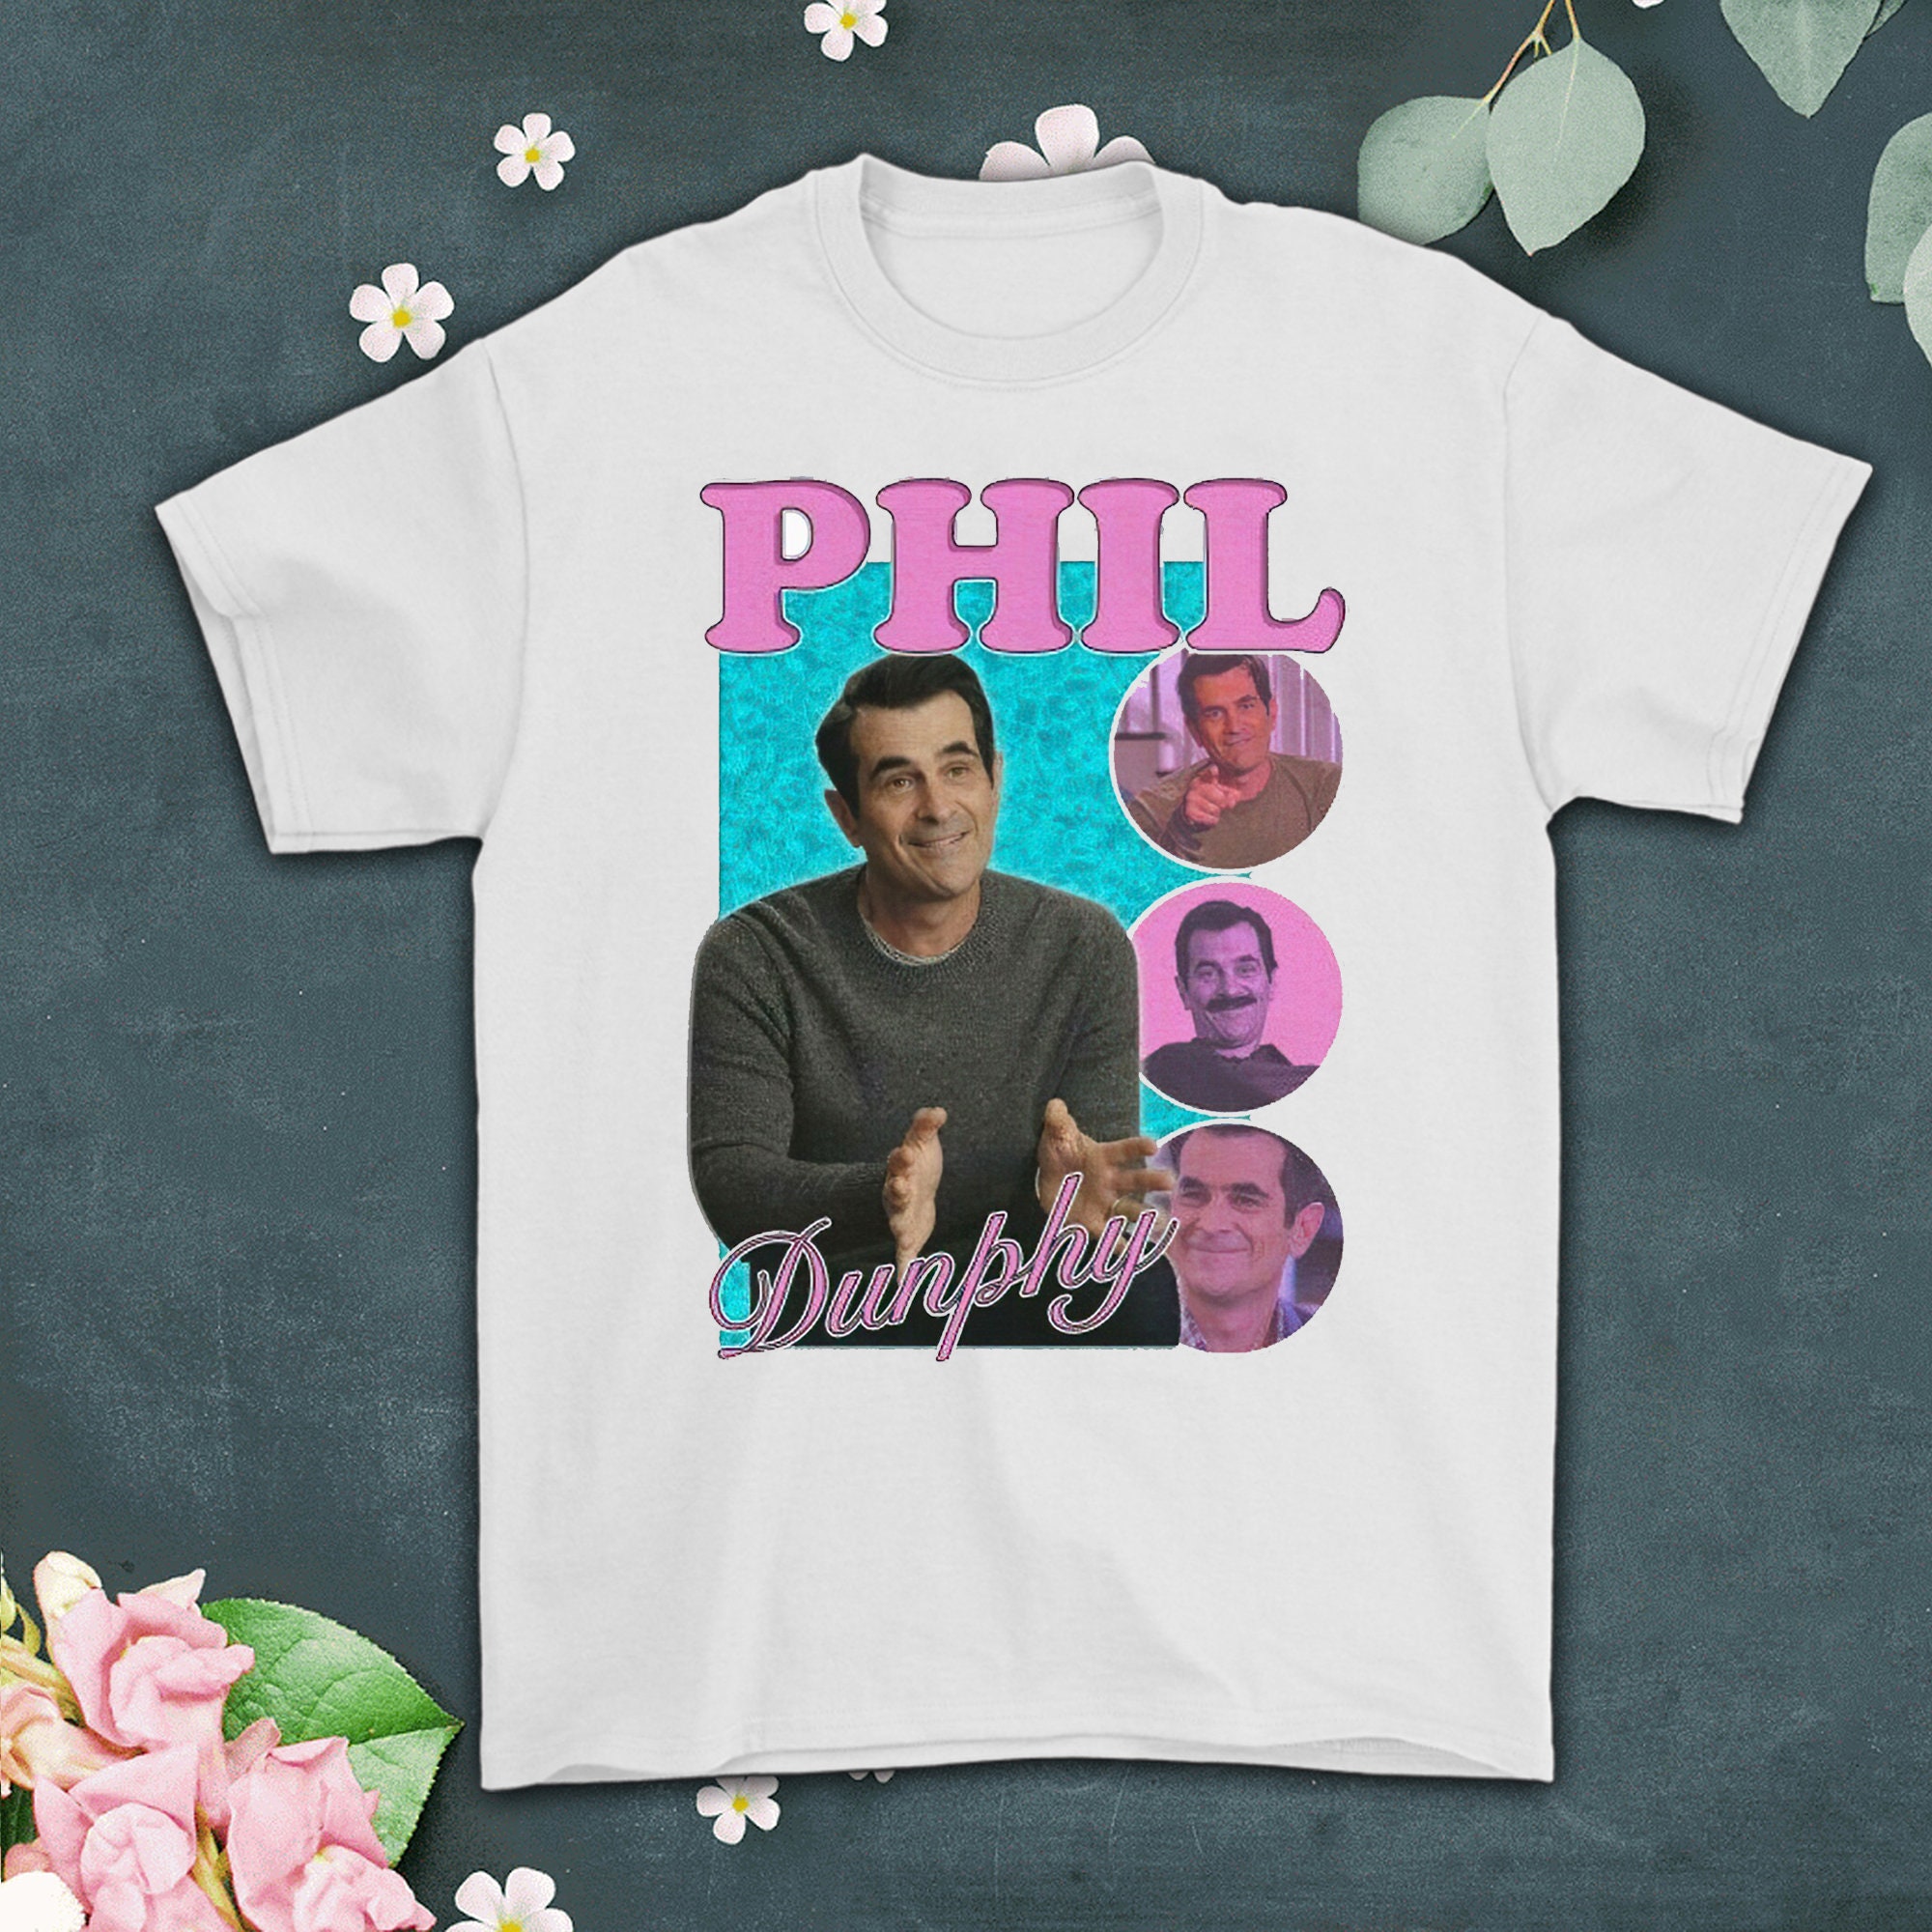 Discover Phil Dunphy Modern Family Classic T-Shirt